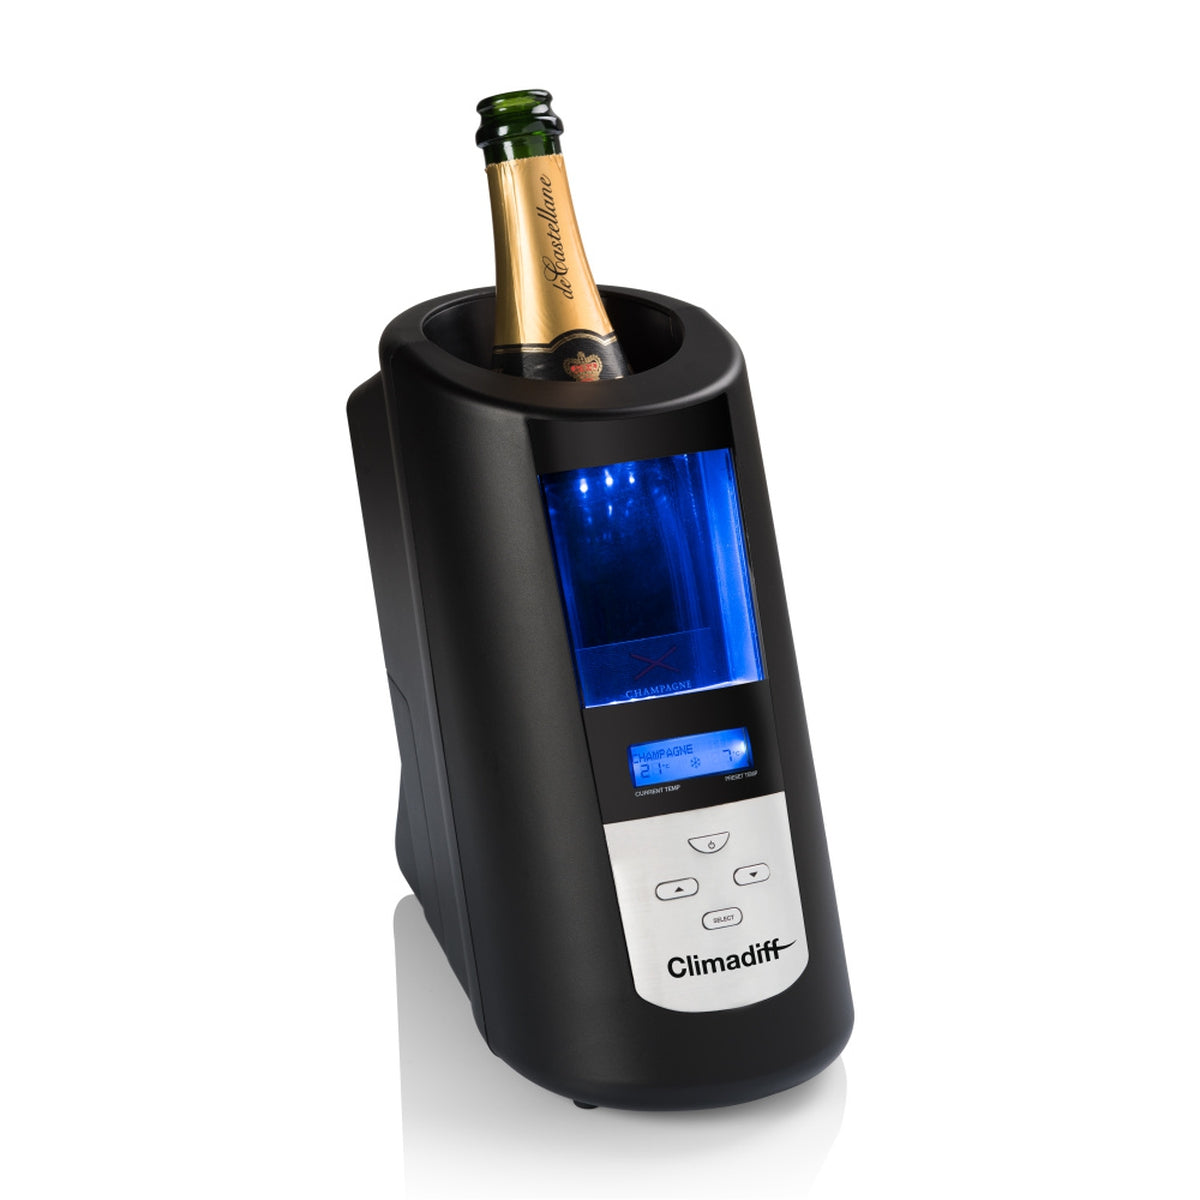 Climadiff thermoelectric wine cooler